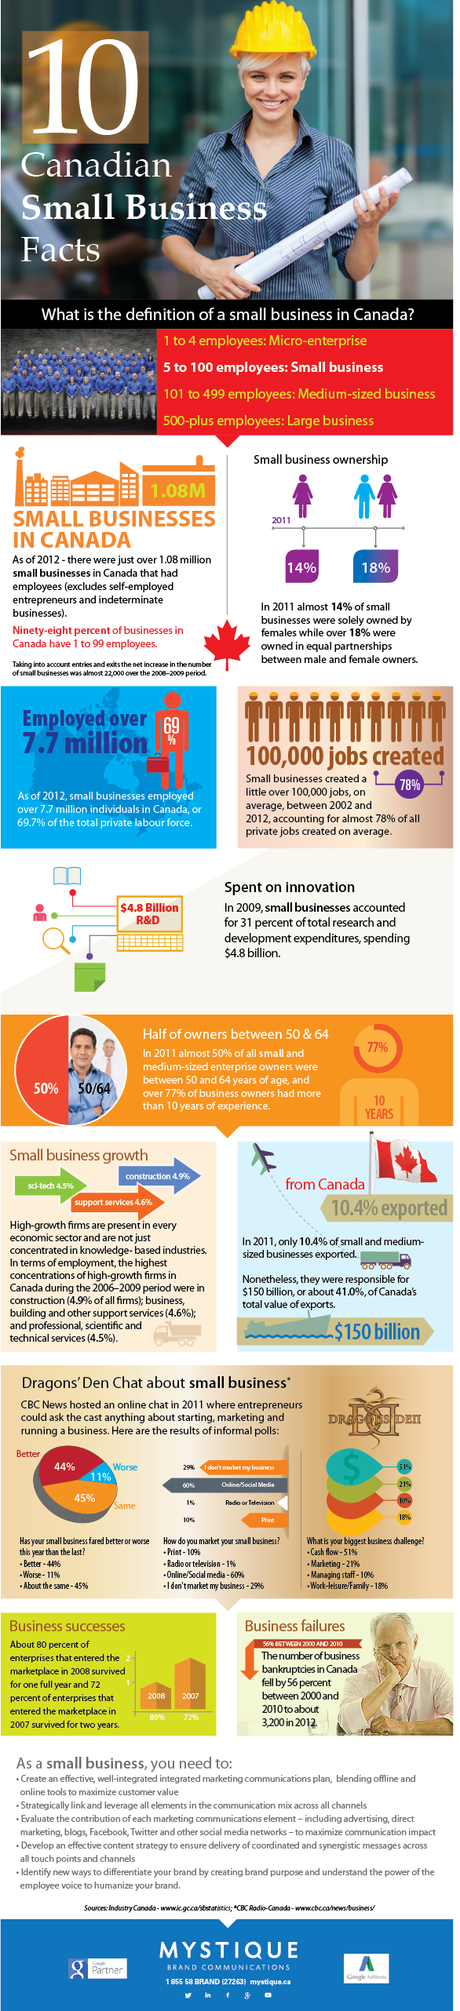 10 Canadian Small Business Facts